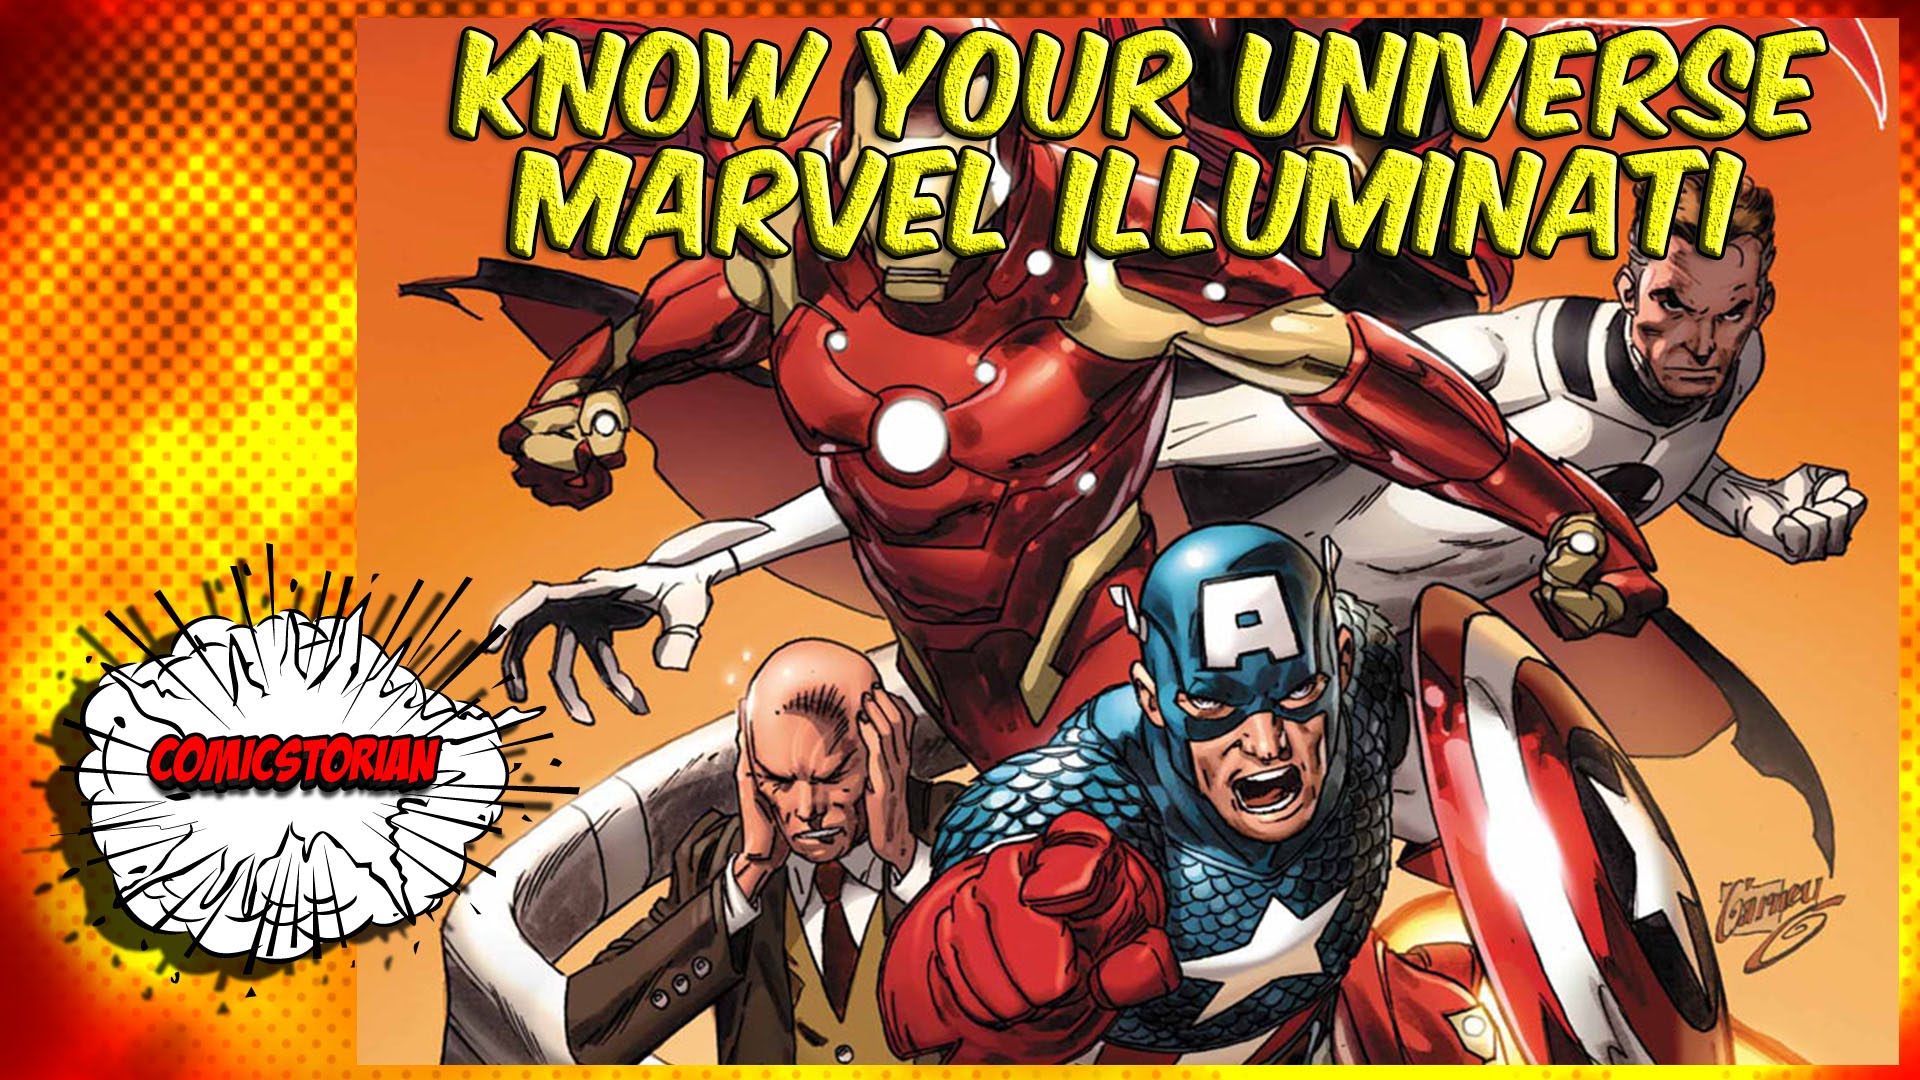 Marvel Illuminati (All Your Favorites!) – Know Your Universe